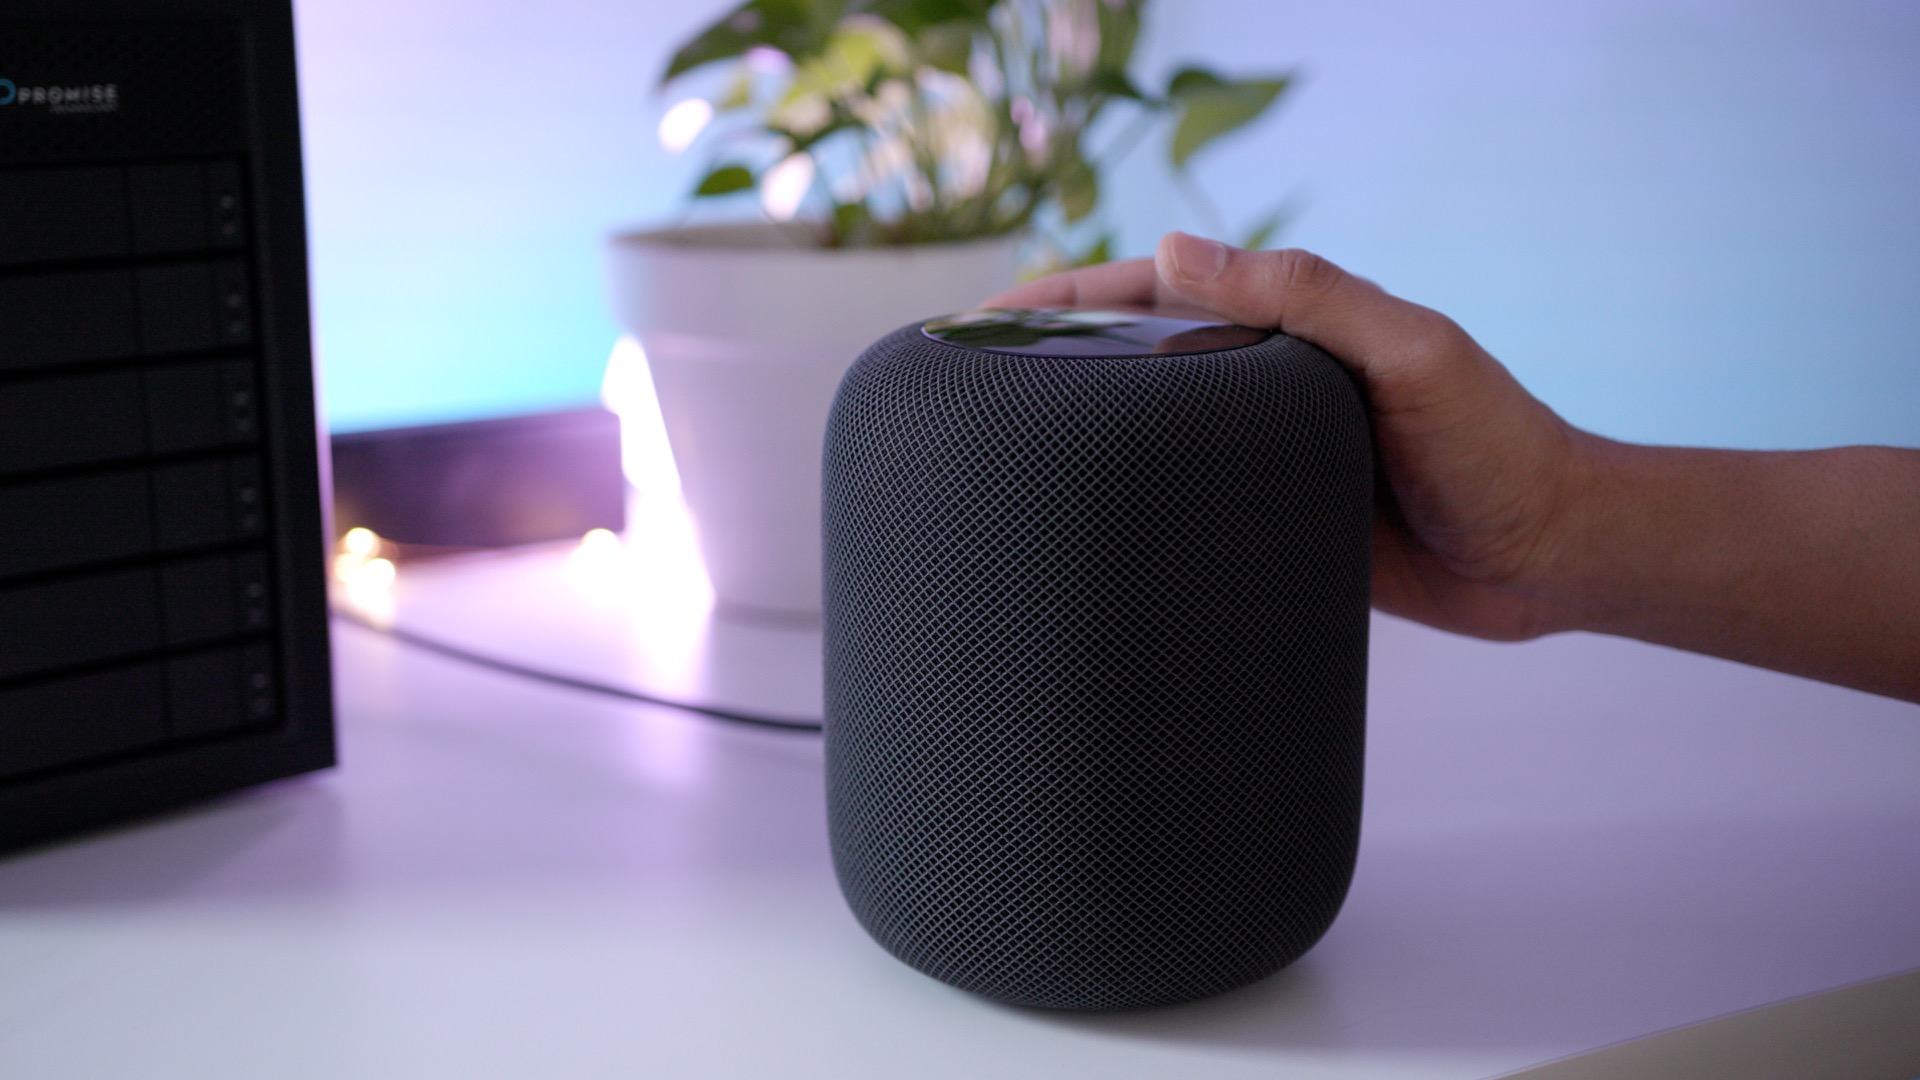 Martin Luther King Junior Claire syndrom Consumer Reports: HomePod audio quality 'very good' but Google Home Max & Sonos  One sound better - 9to5Mac